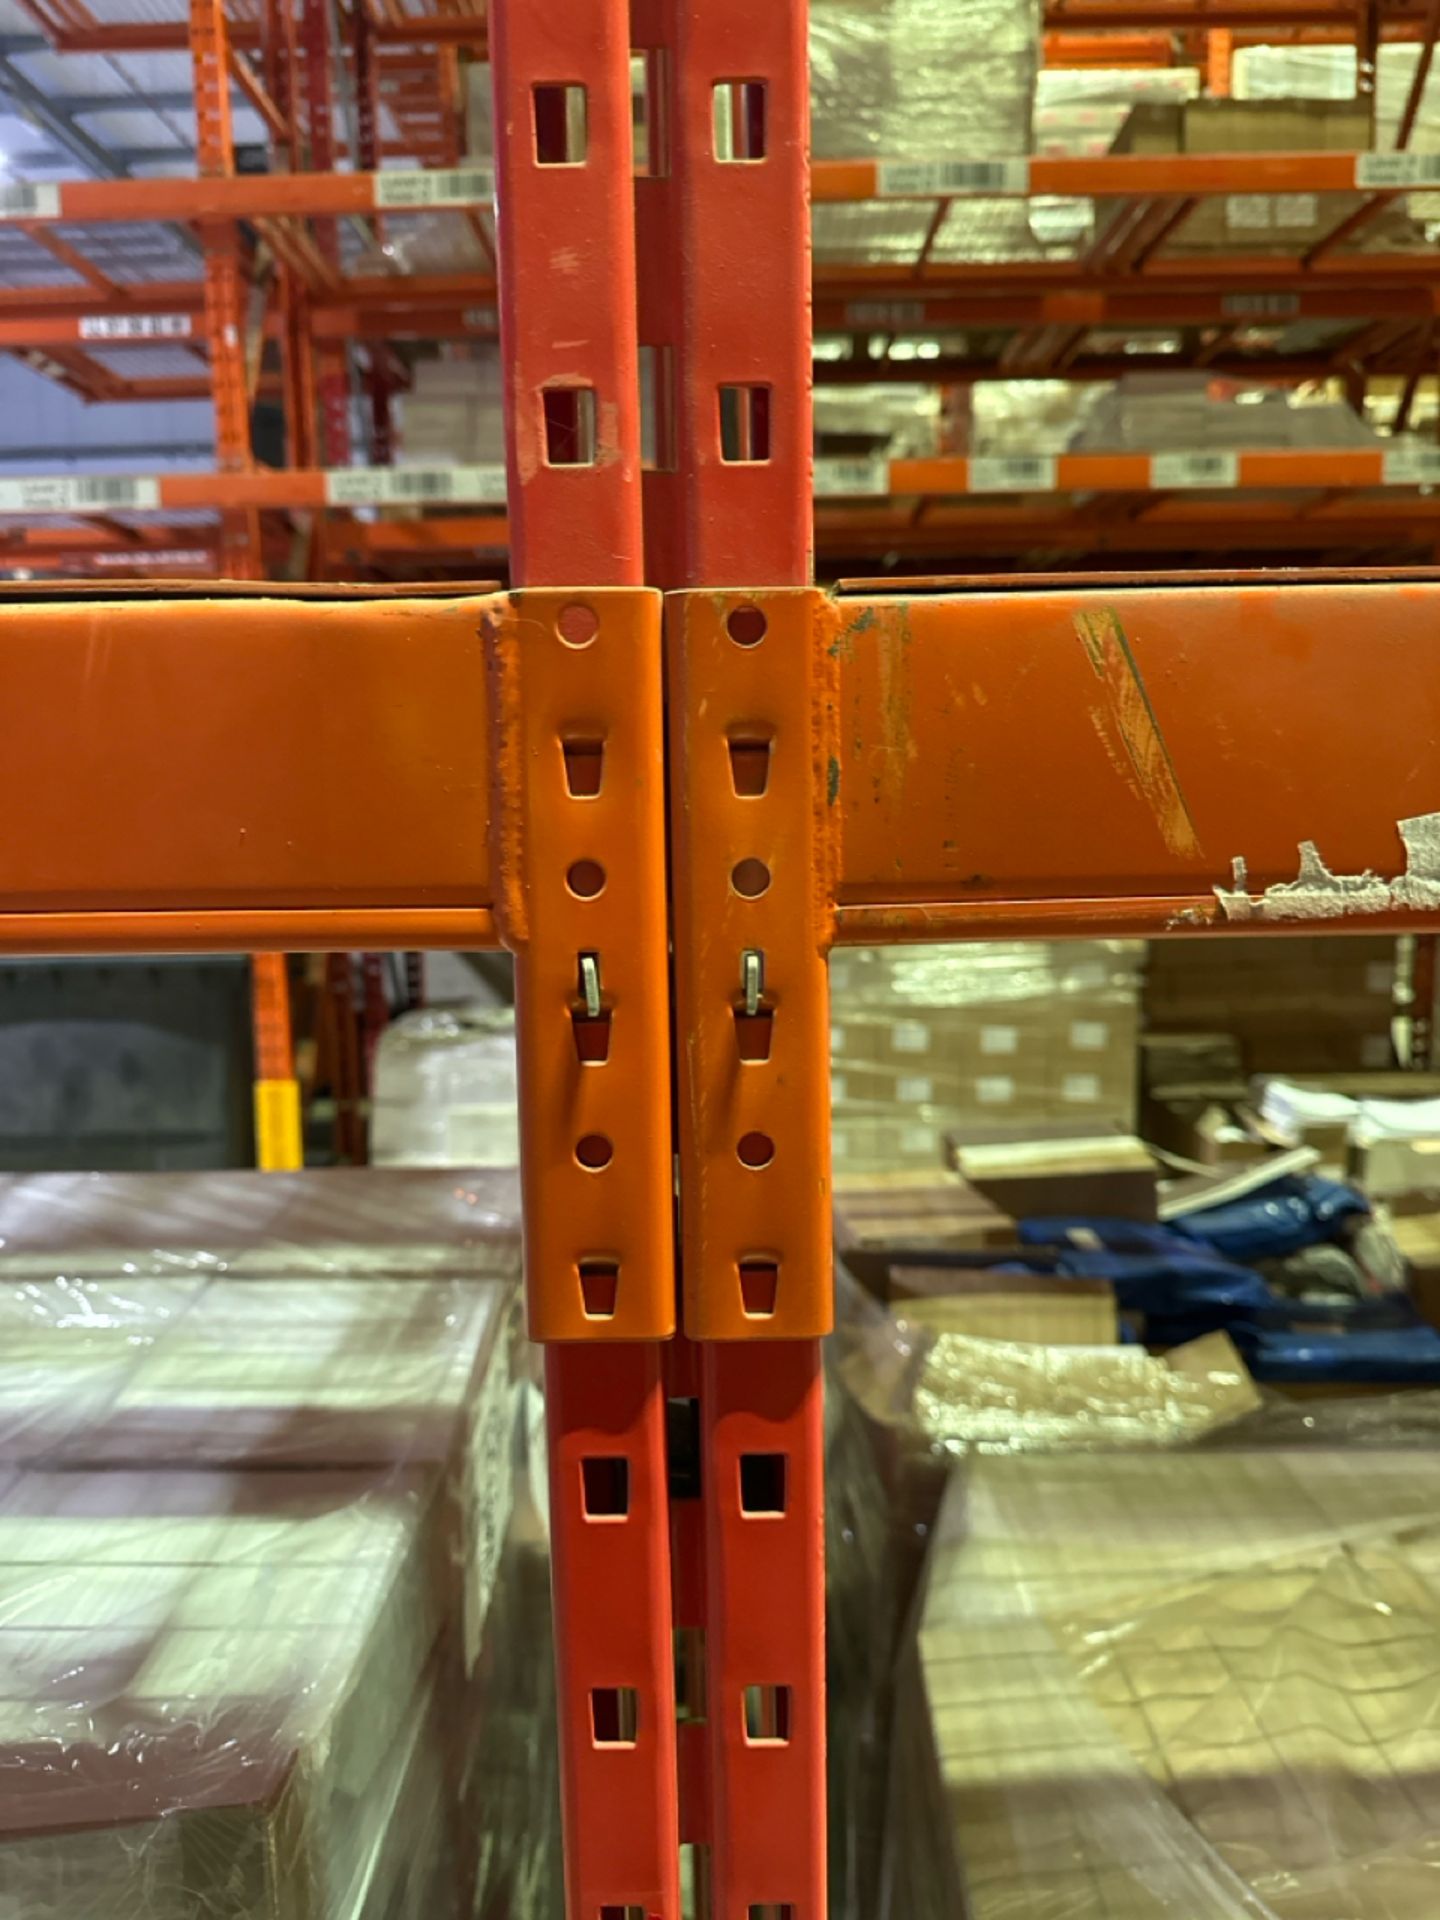 22 Bays Of Boltless Pallet Racking - Image 6 of 11